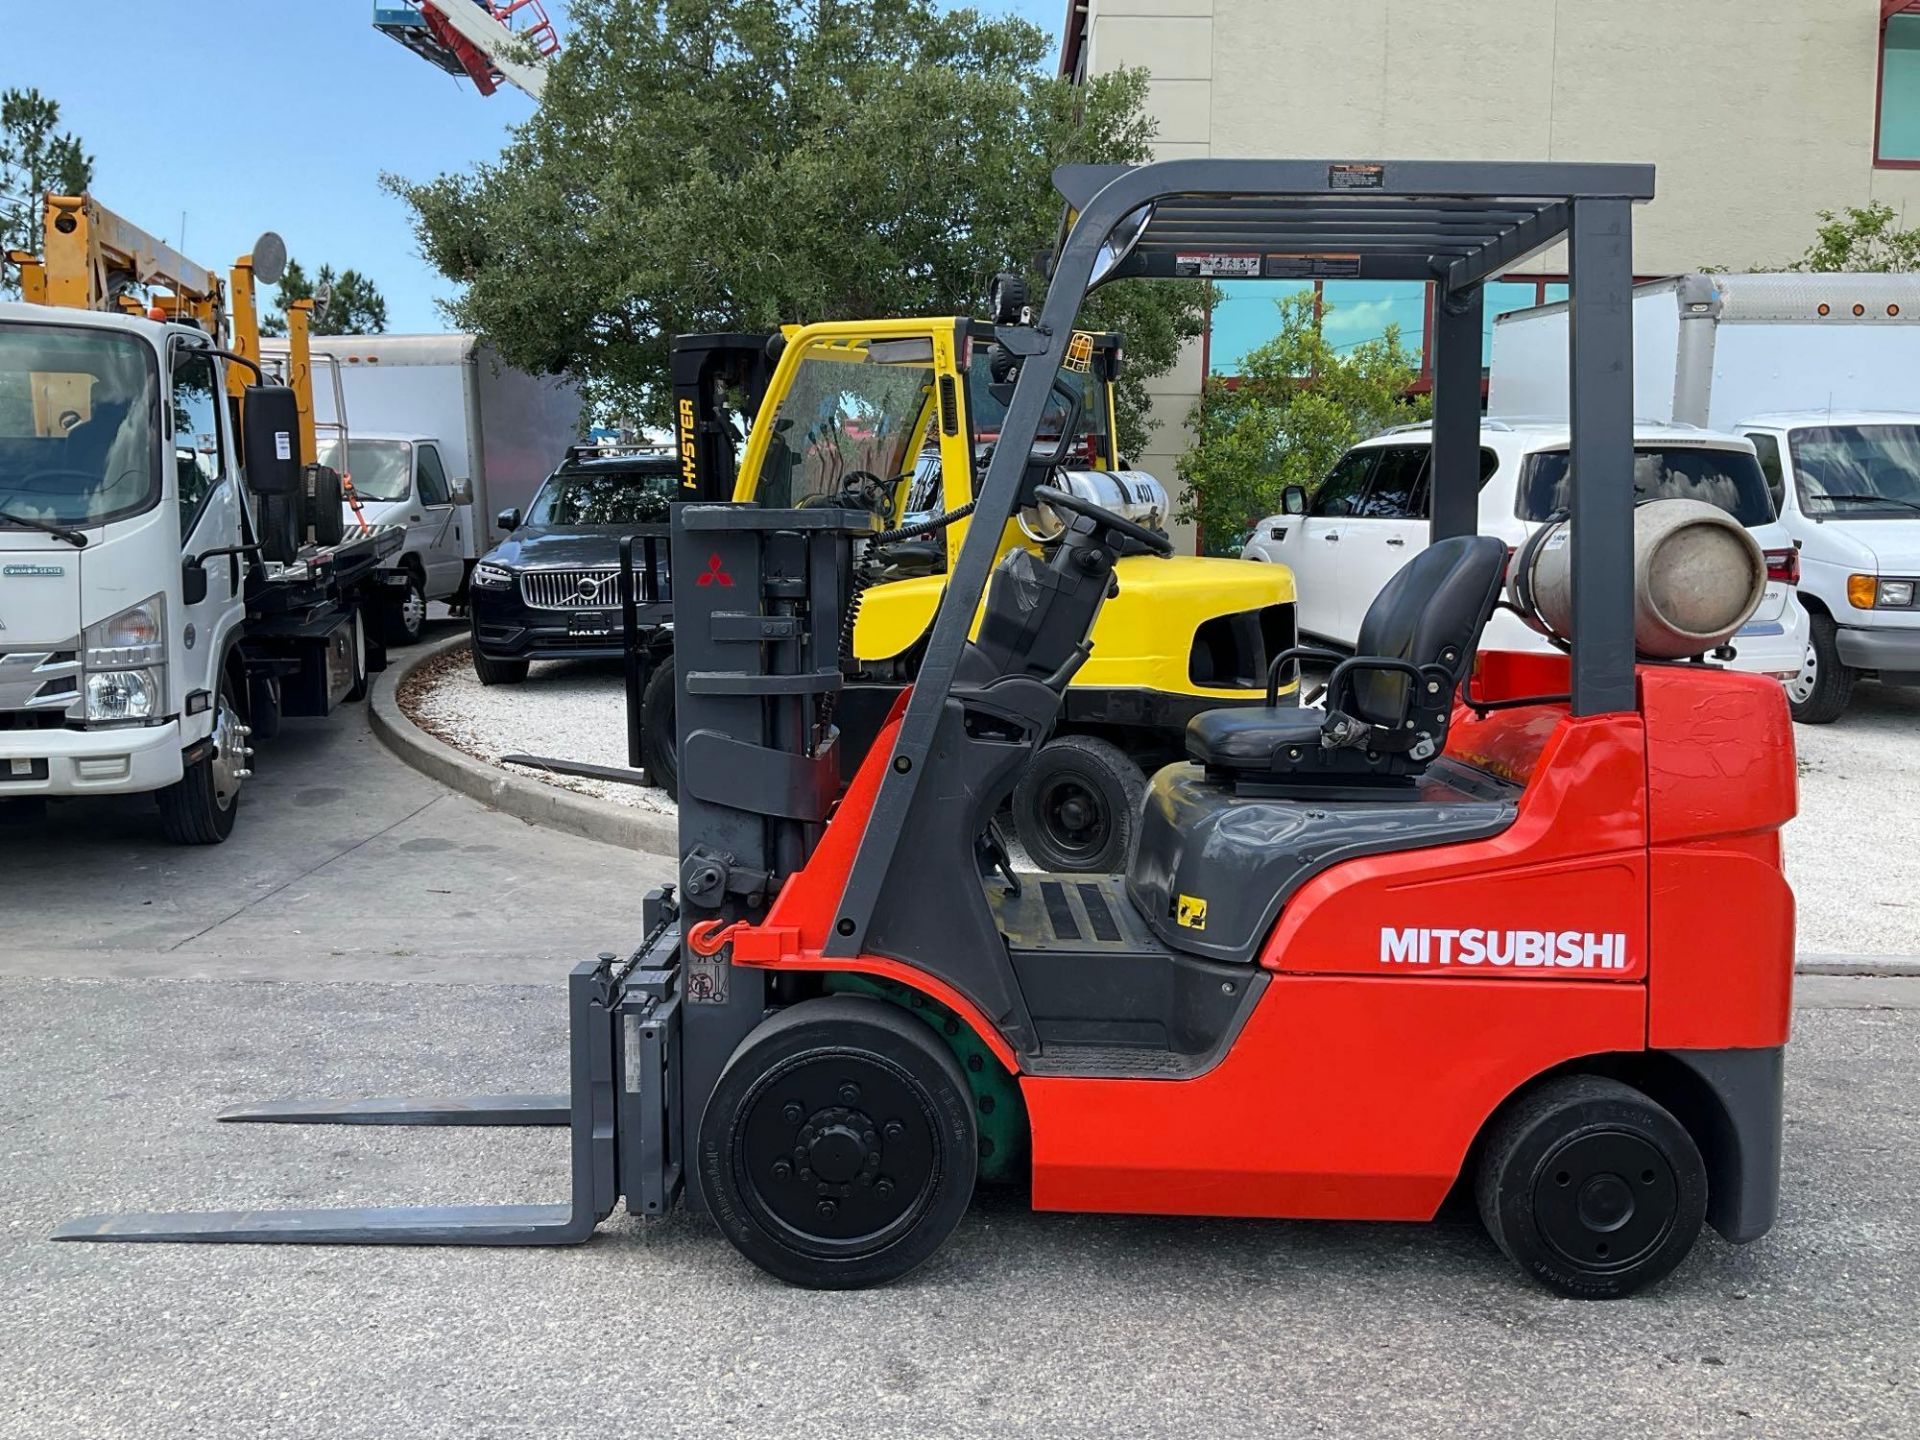 MITSUBISHI FORKLIFT MODEL FGC25N-LP, LP POWERED, APPROX MAX CAPACITY 5000LBS - Image 6 of 13